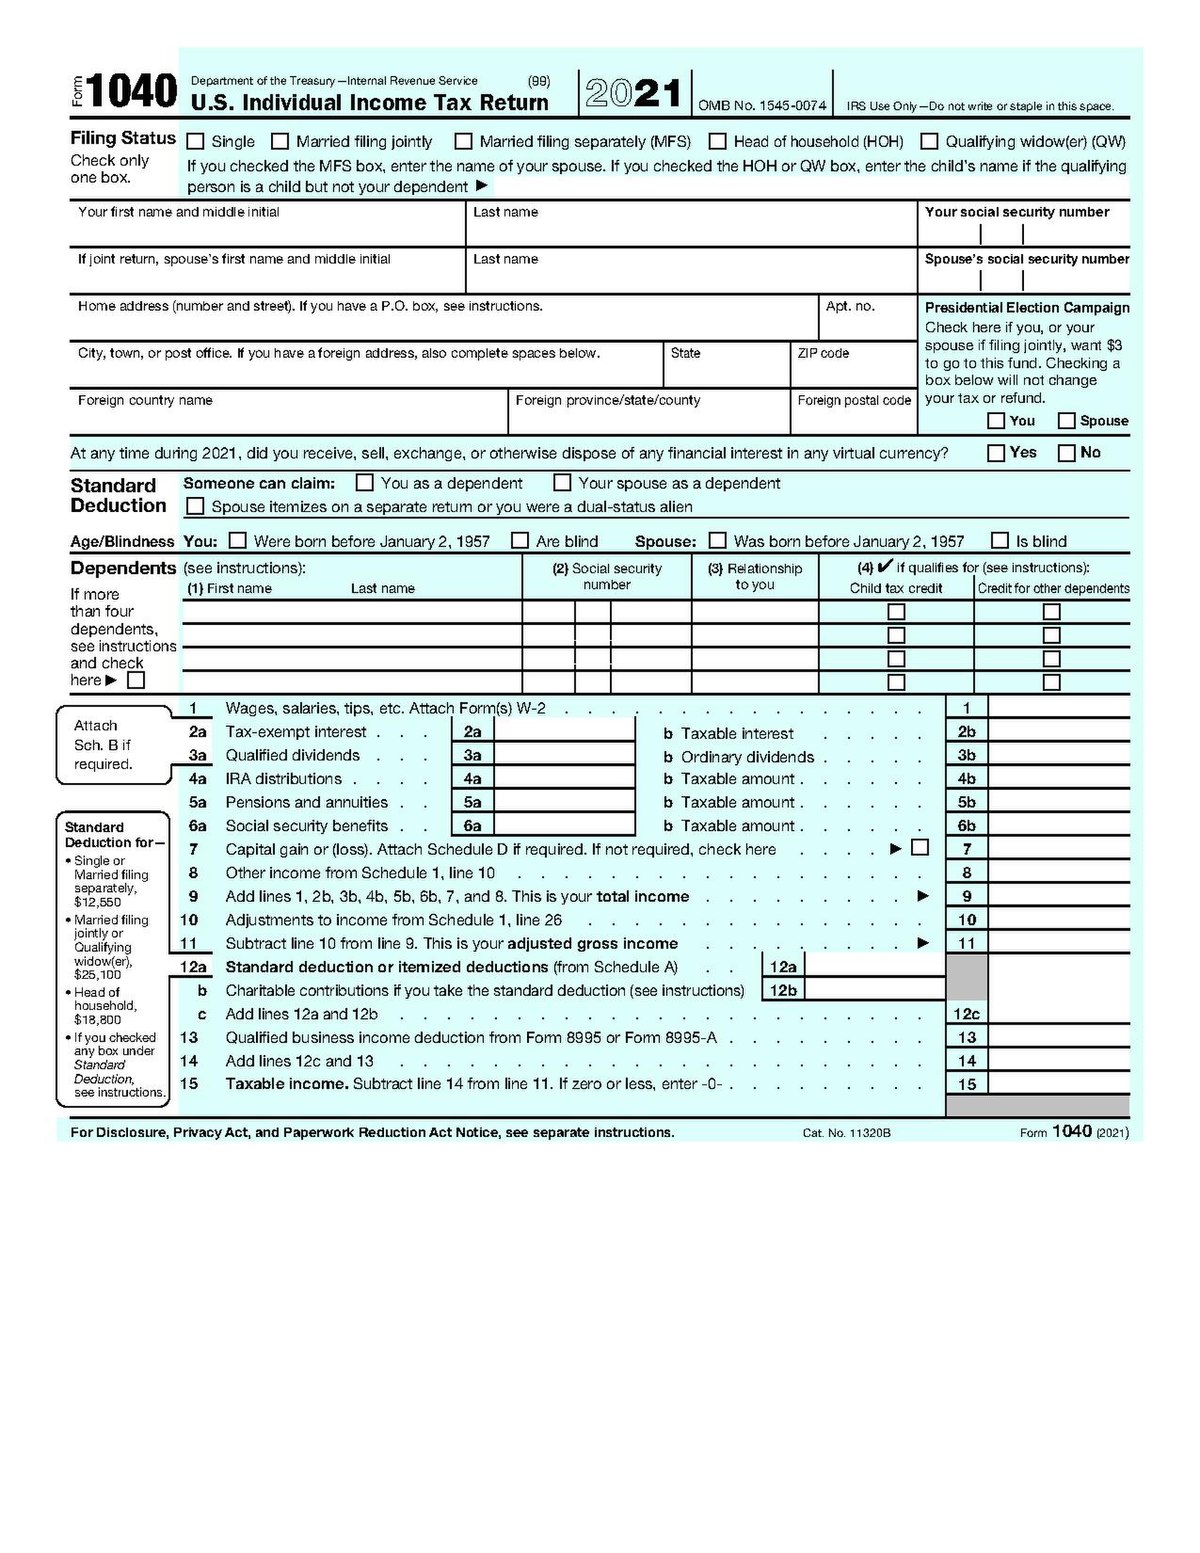 Updated tax forms